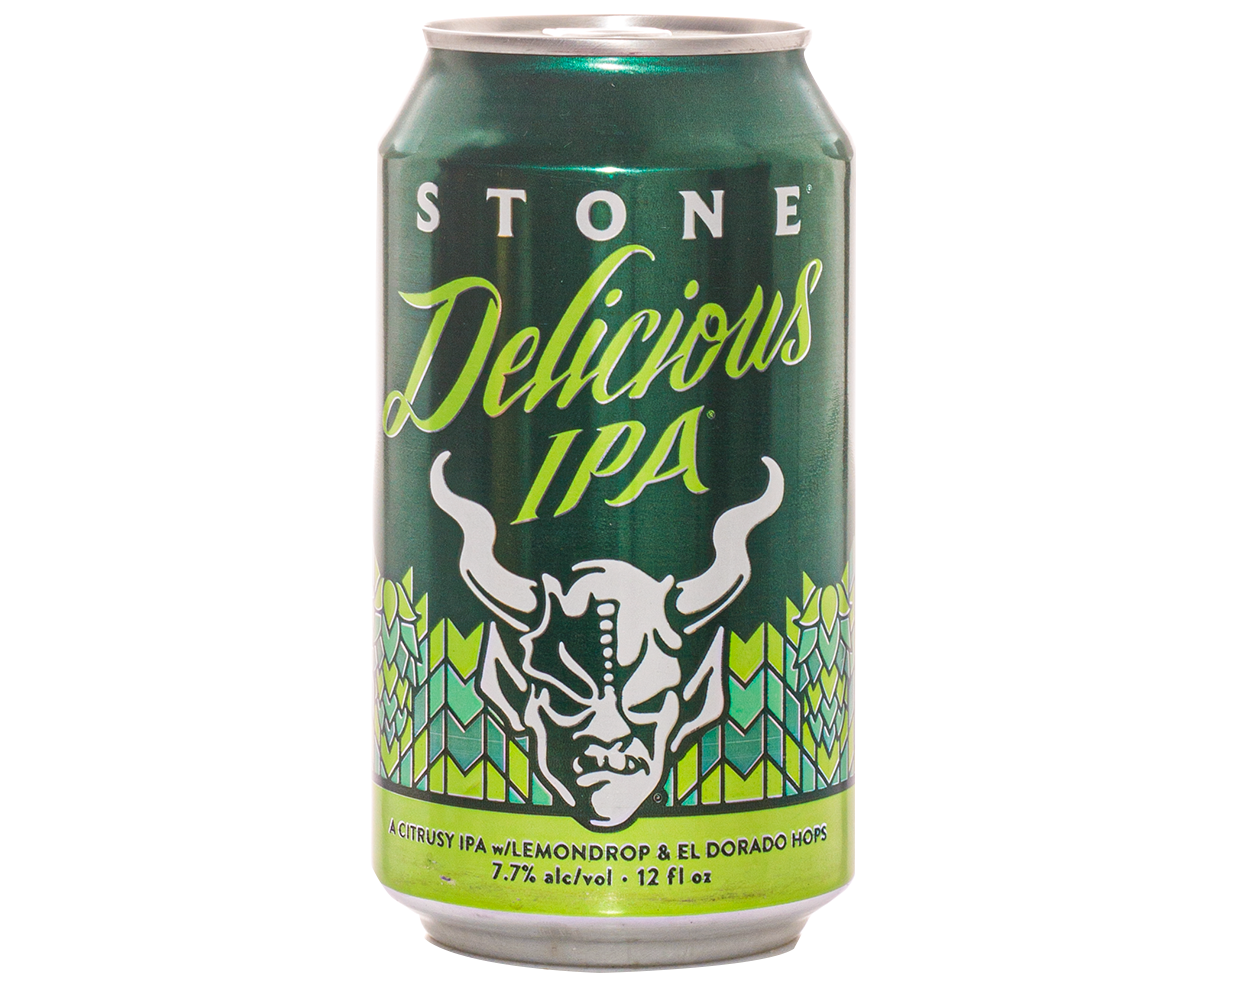 Stone Delicious Ipa - Stone Brewing Co. - Buy Craft Beer Online at Half  Time | Half Time